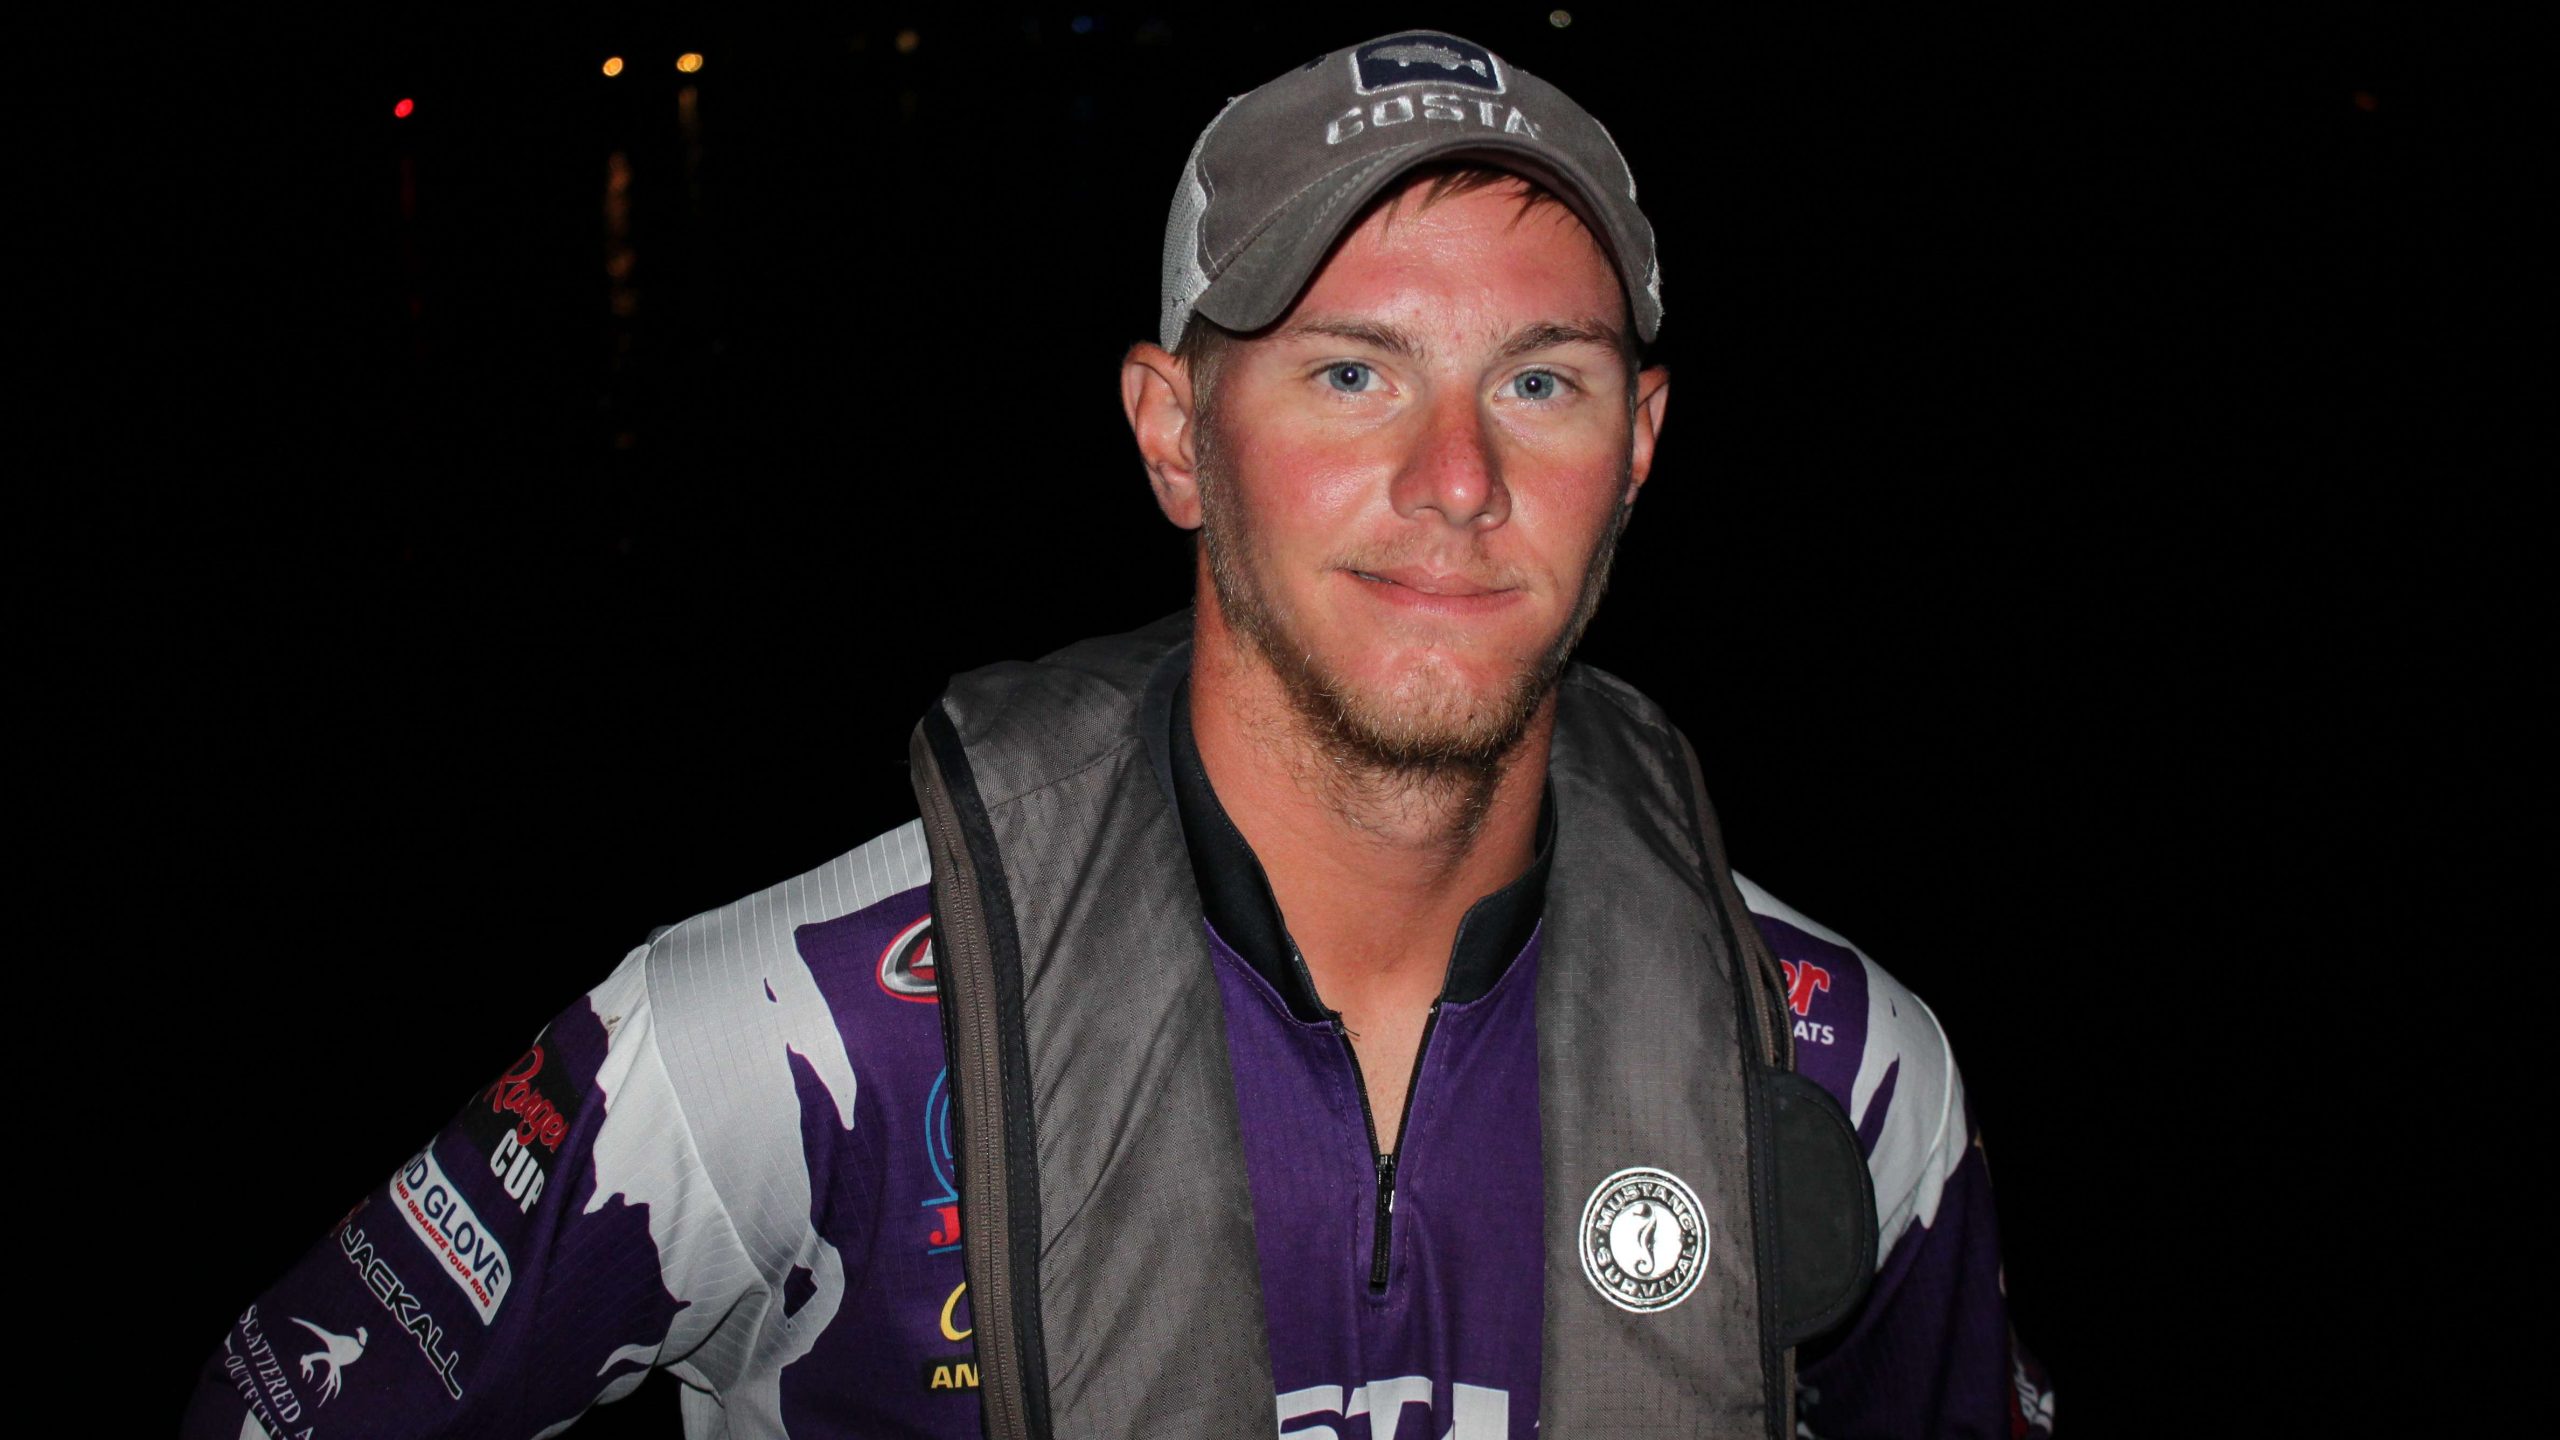 Kansas State angler Kyle Alsop is the top seed in the Carhartt Bassmaster College Series Classic Bracket presented by Bass Pro Shops.